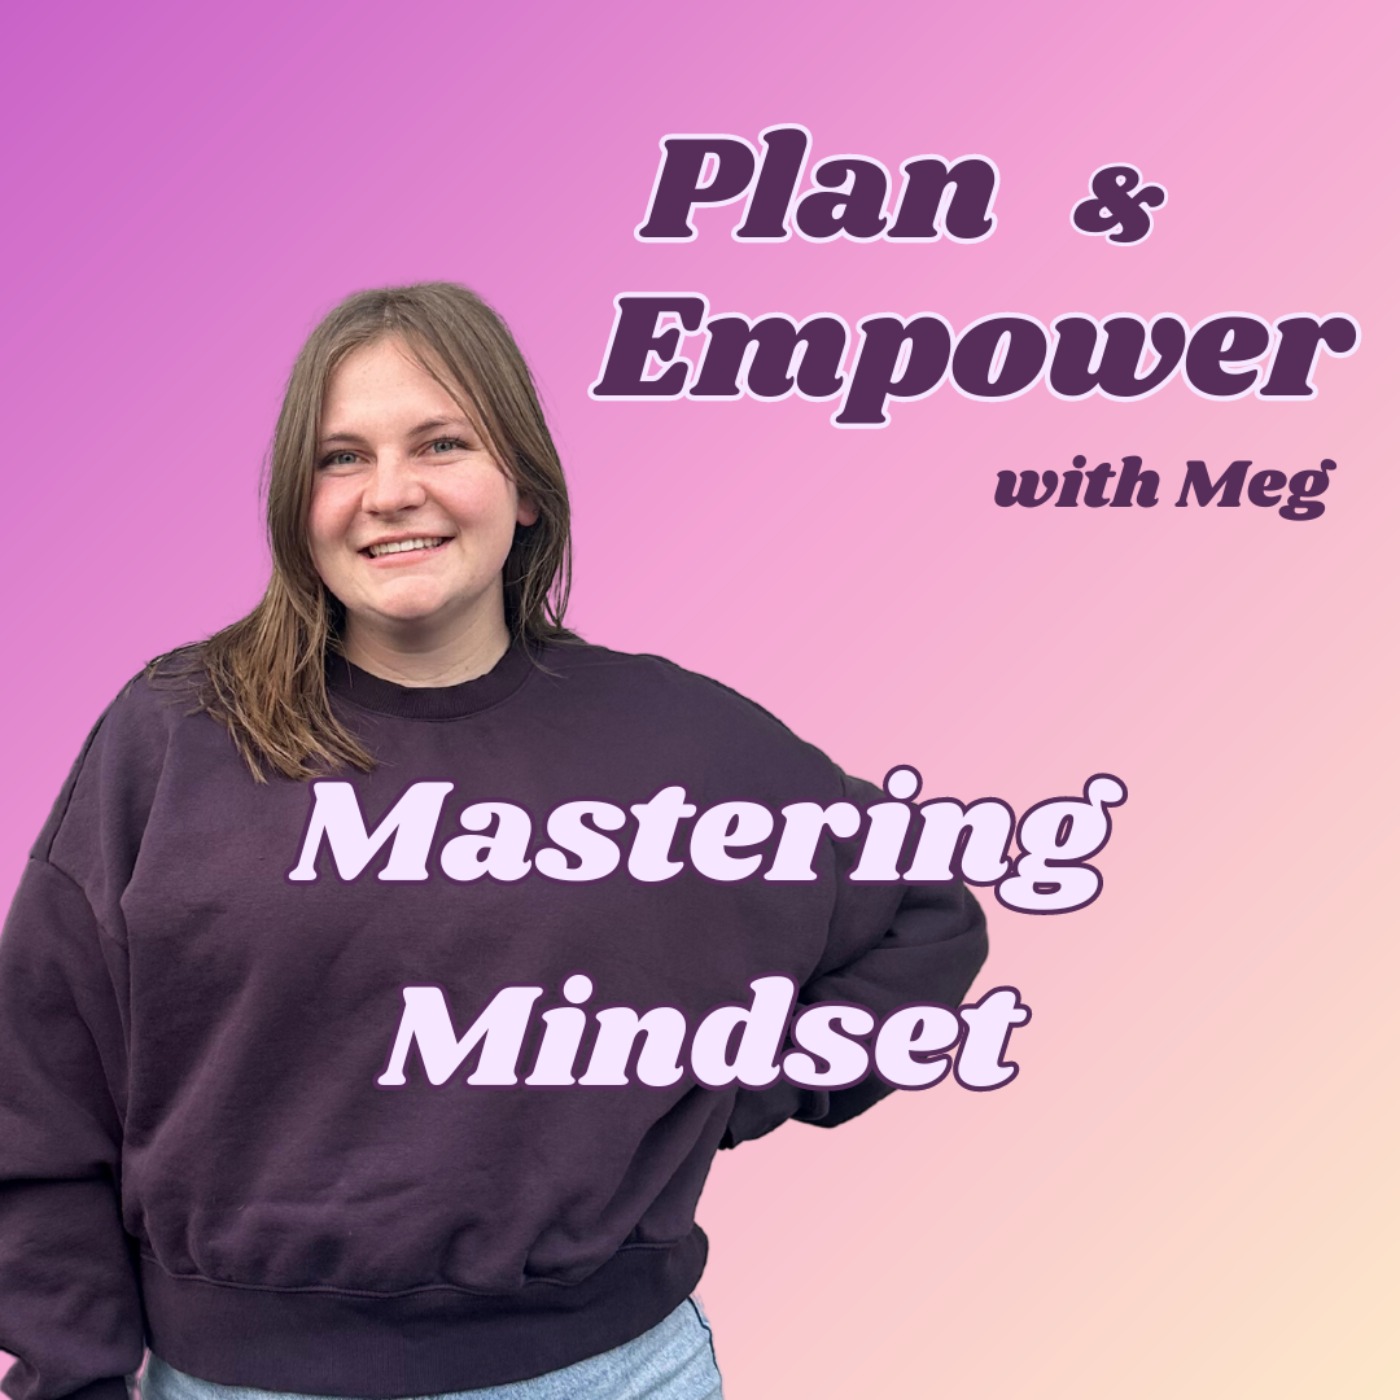 Mastering Mindset: Part 1 - Planting the Seed of Self-Belief